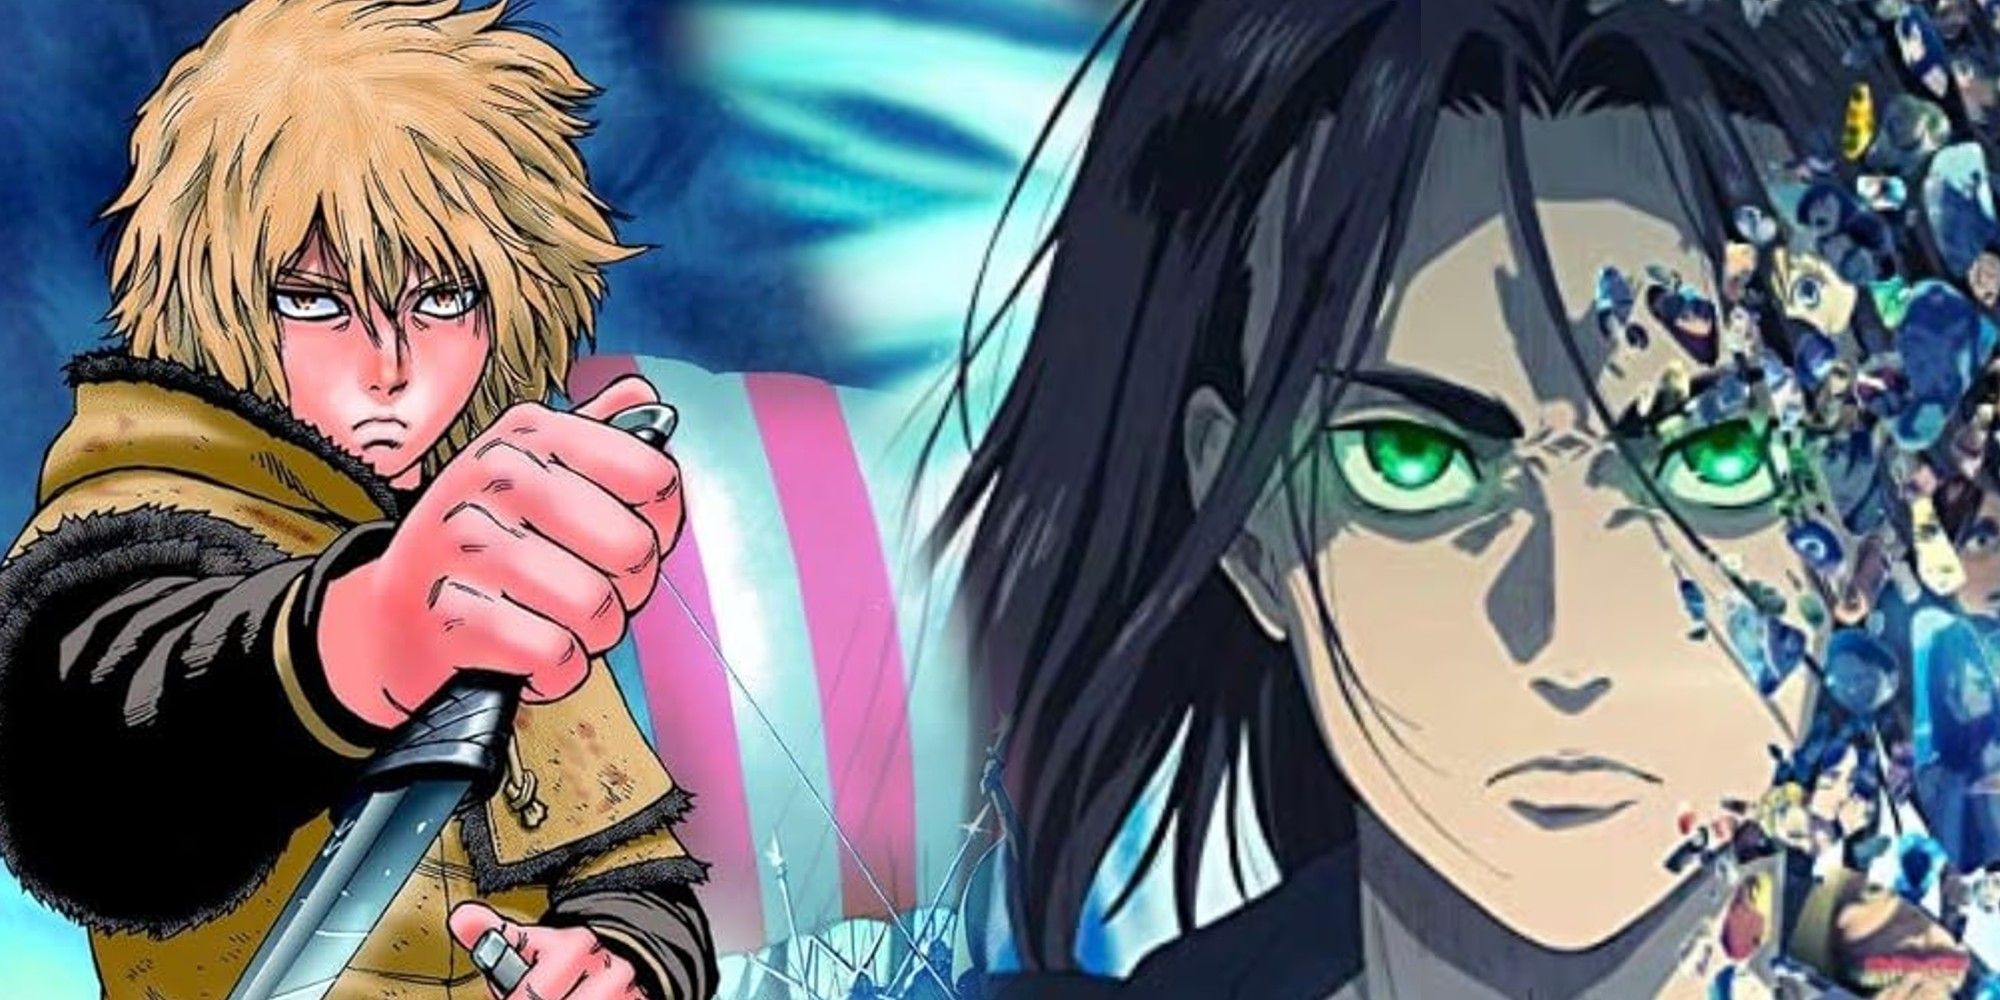  Thorfinn from volume 1 of VInland Saga and Eren from the final season of Attack on Titan together against a blue background.